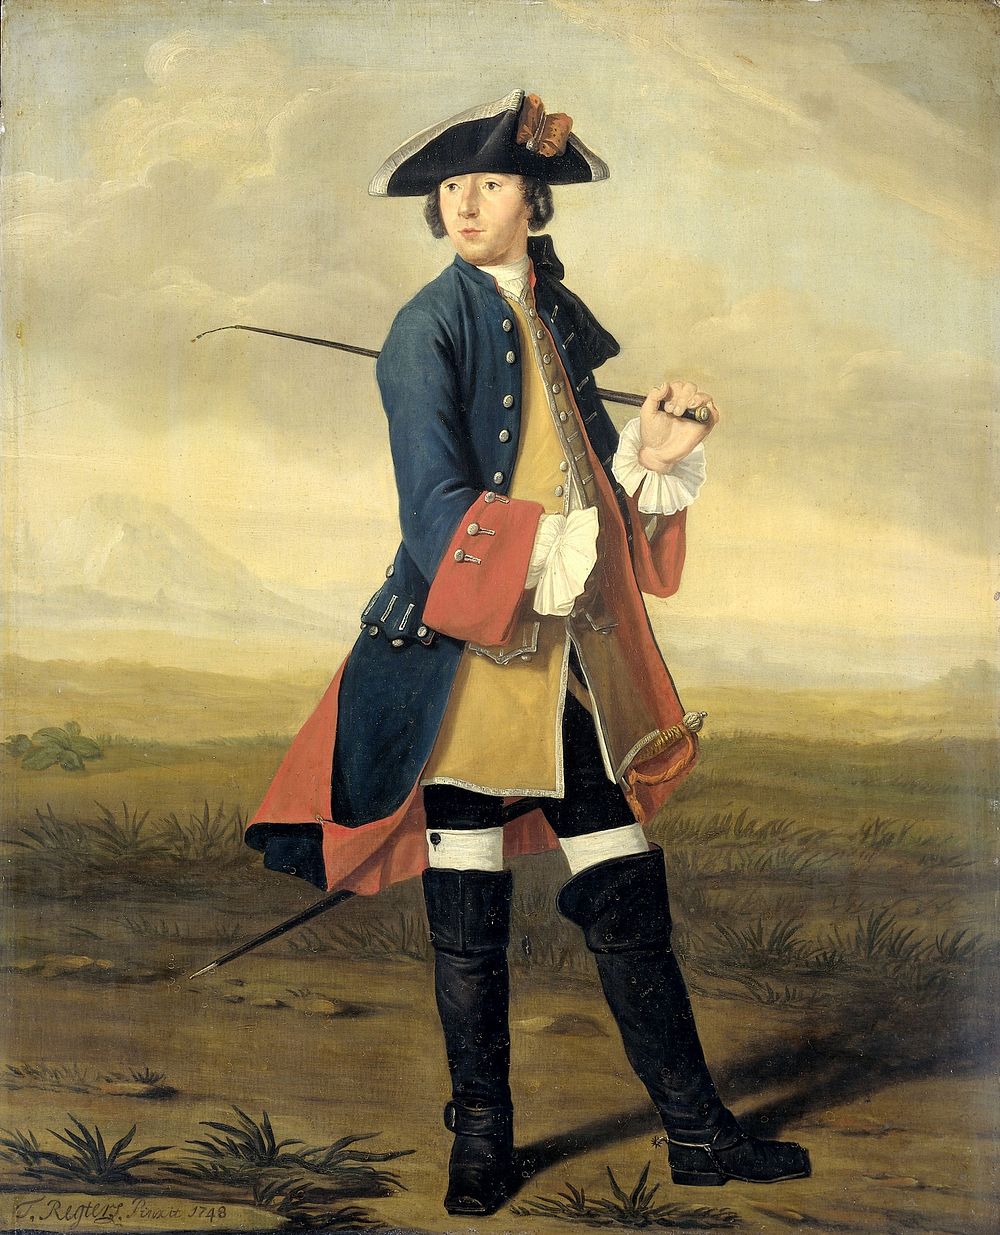 Portrait of Ludolf Backhuysen II, Painter, in the Uniform of the Dragoons (1748) by Tibout Regters